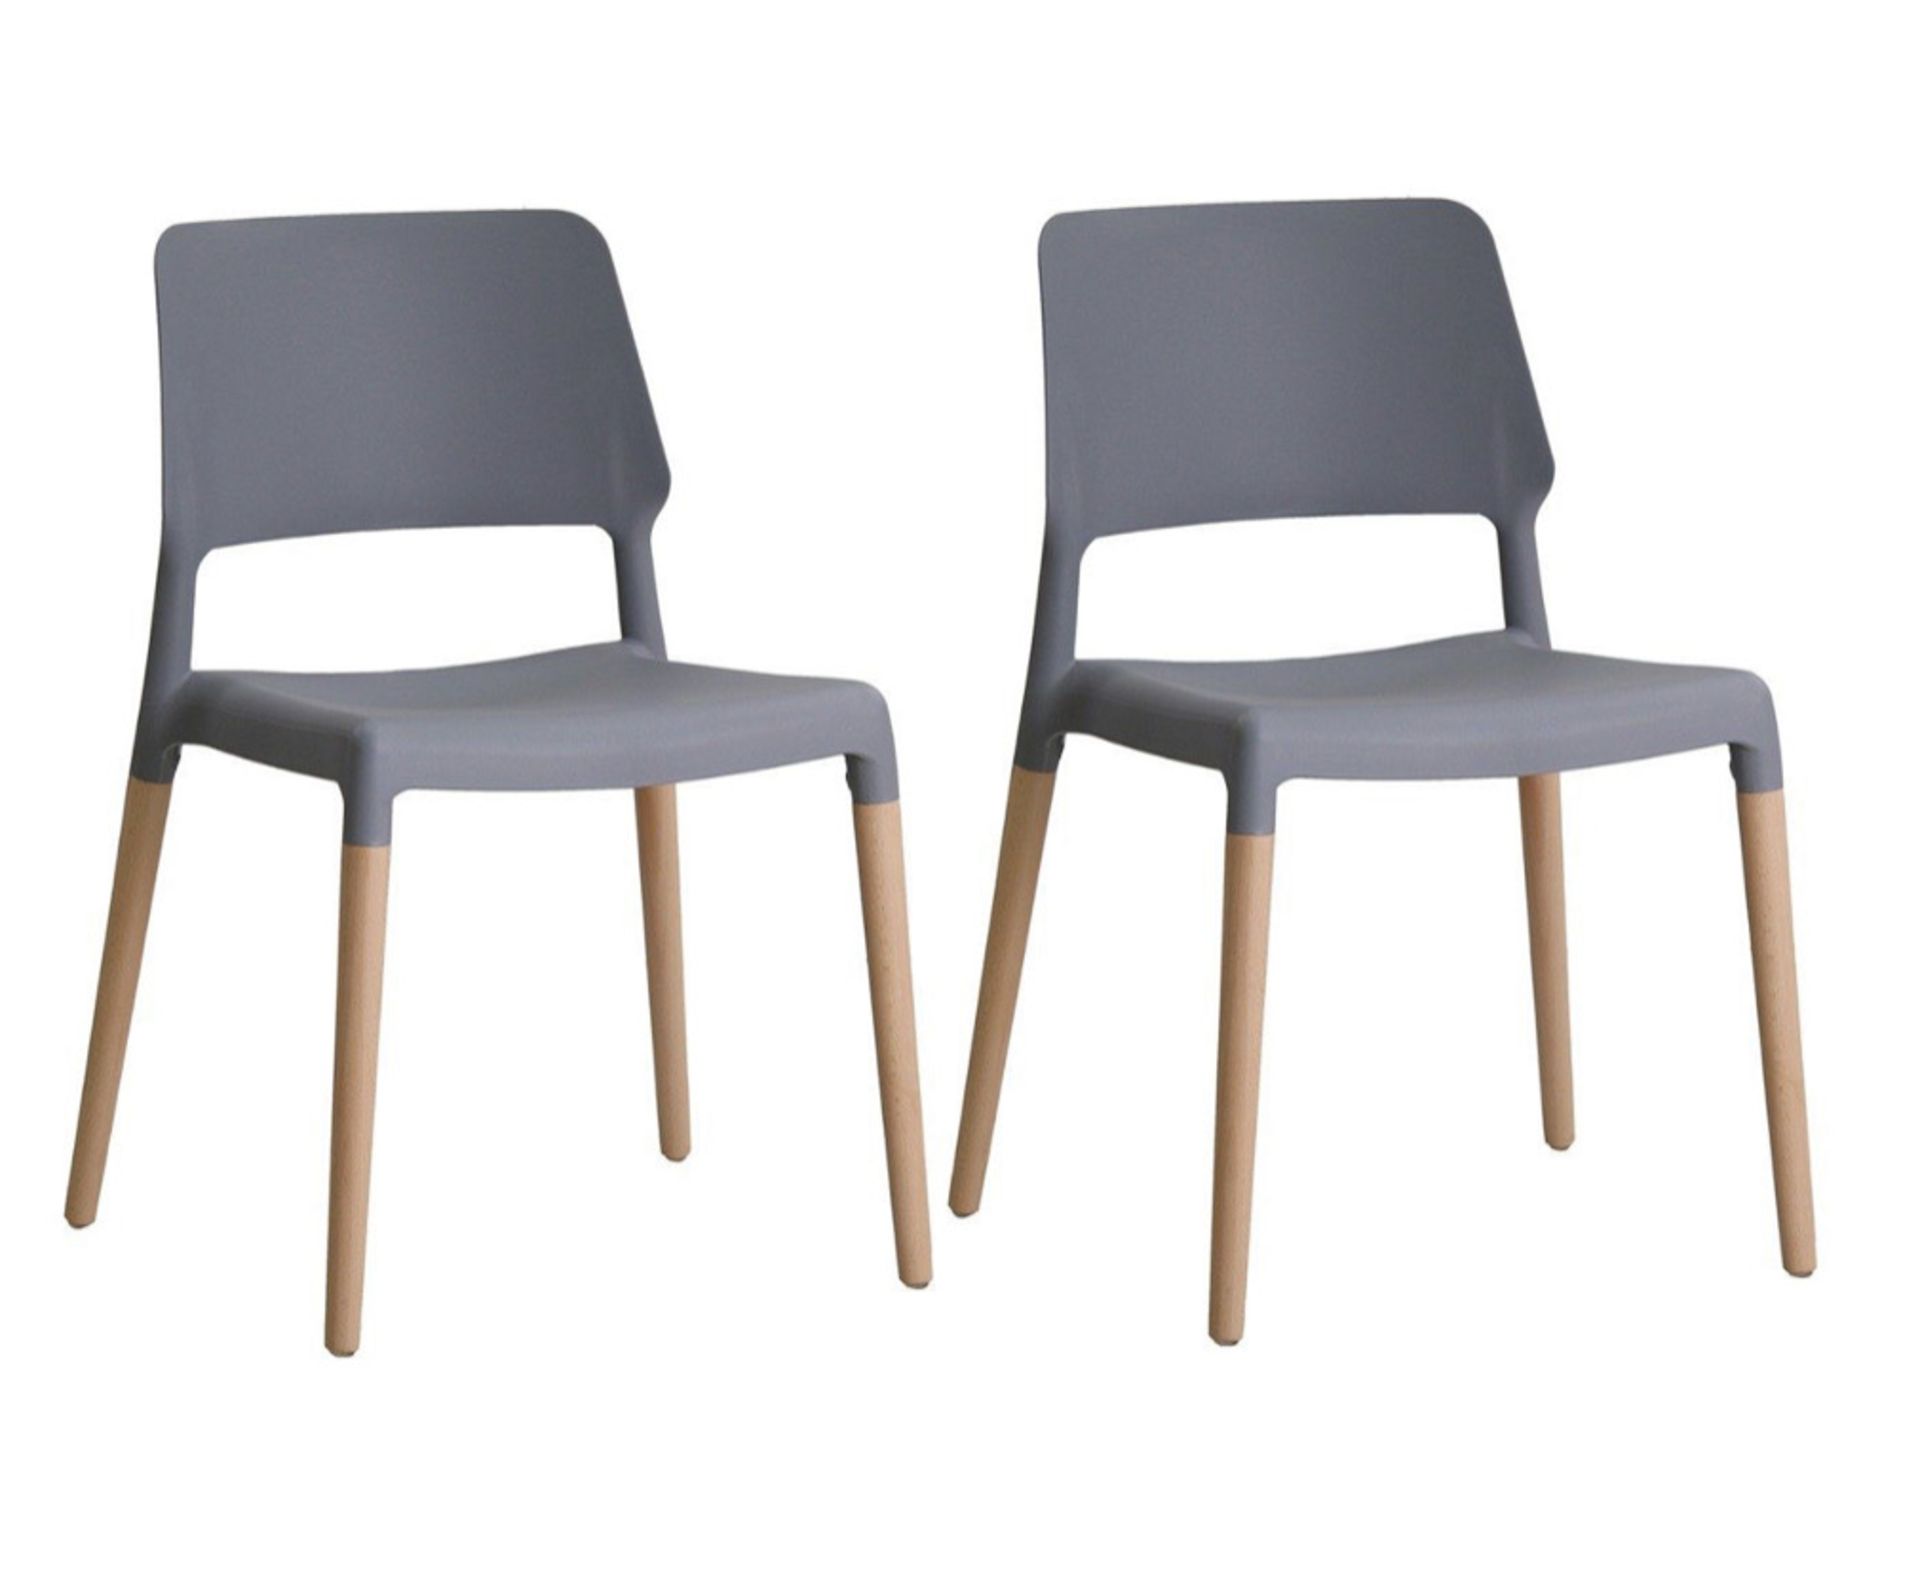 RIVA PAIR OF DINING CHAIRS IN GREY DURABLE PLASTIC - RRP £159 PER PAIR - Image 3 of 3